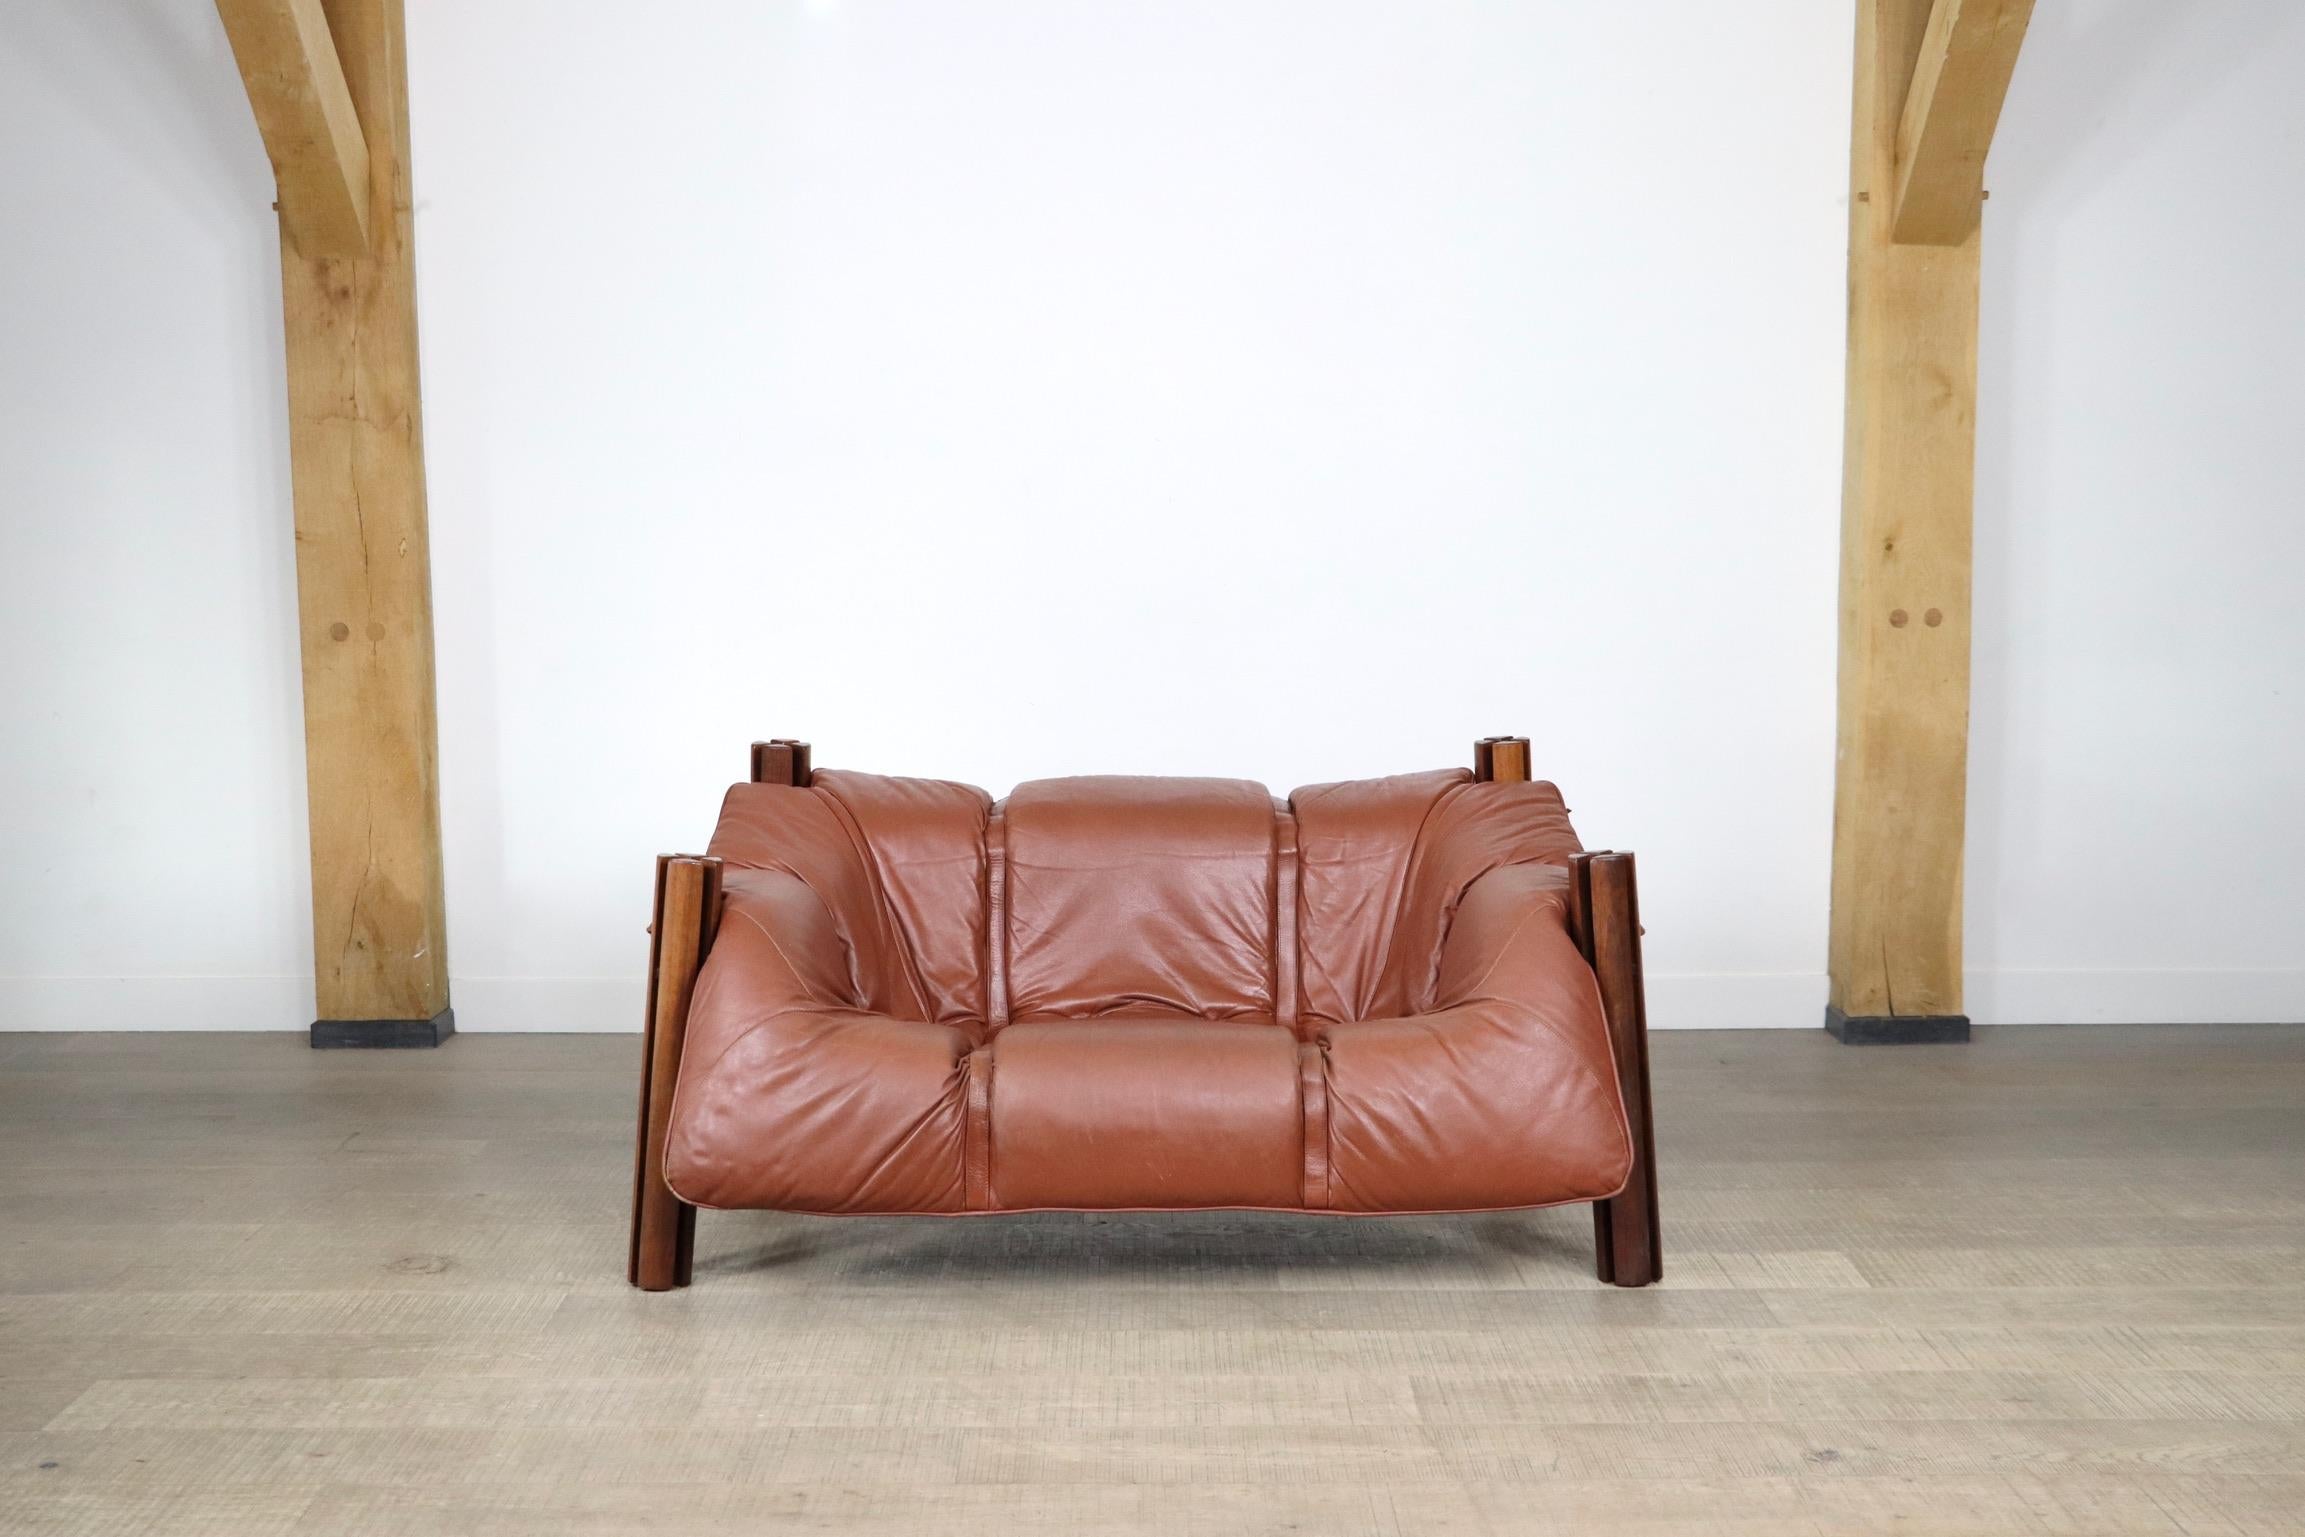 Incredible cognac leather two seater sofa by Percival Lafer. 
The sofa is made of four gorgeous Brazilian hardwood legs which are attached to the metal frame by screws. The cognac leather seating cushion lays in the metal base frame supported by a